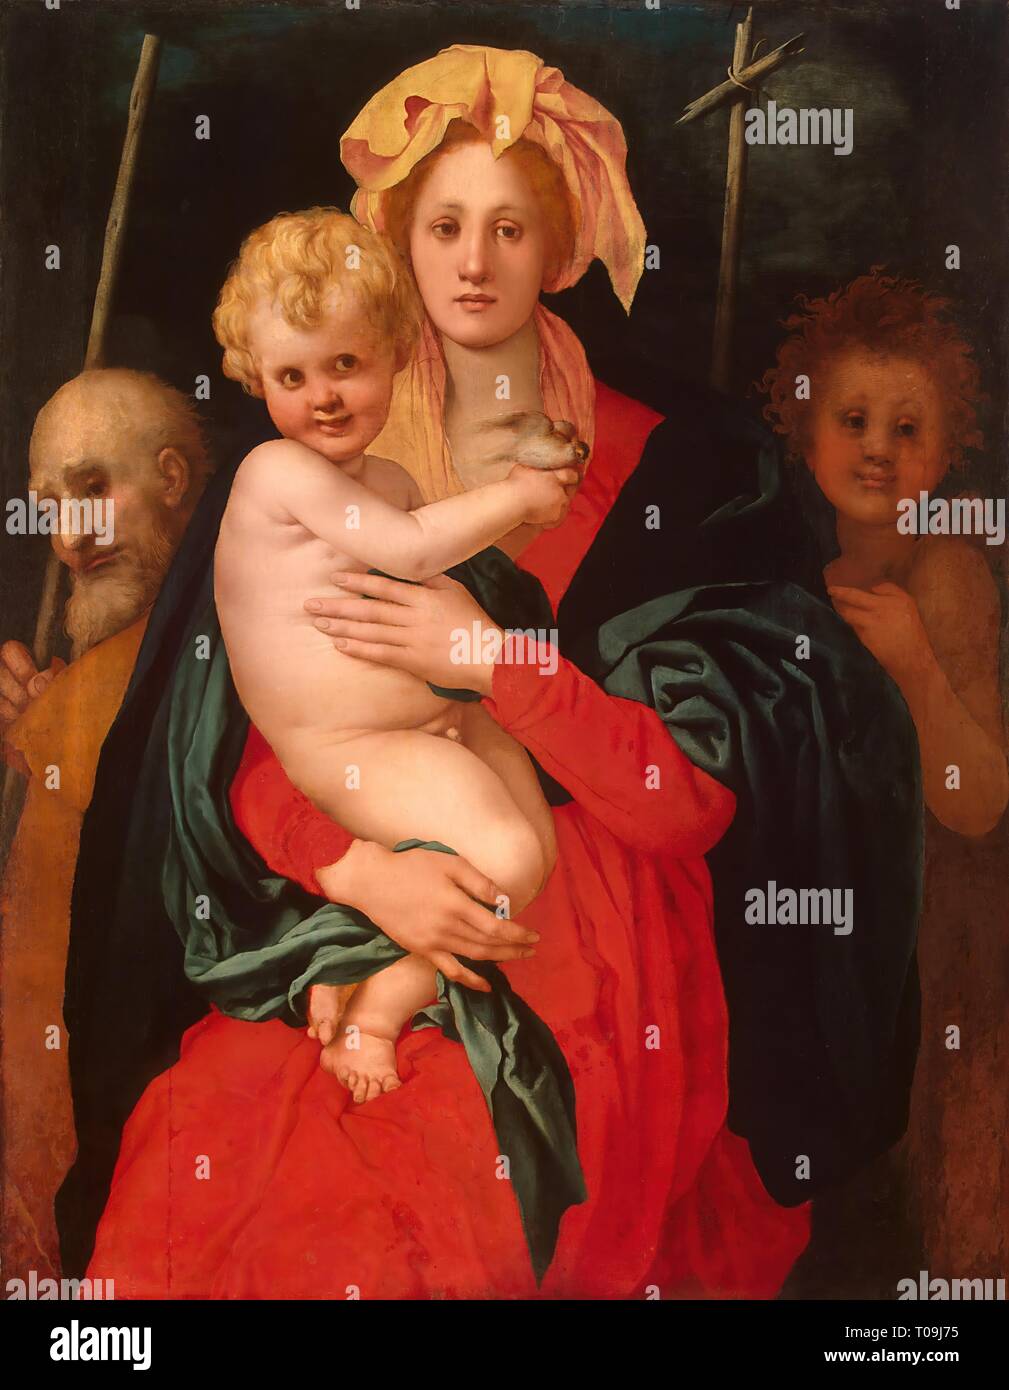 'The Virgin and Child with St Joseph and St John the Baptist'. Italy, Early 1520s. Dimensions: 120x98,5 cm. Museum: State Hermitage, St. Petersburg. Author: Pontormo (Jacopo Carucci). Pontormo. Stock Photo